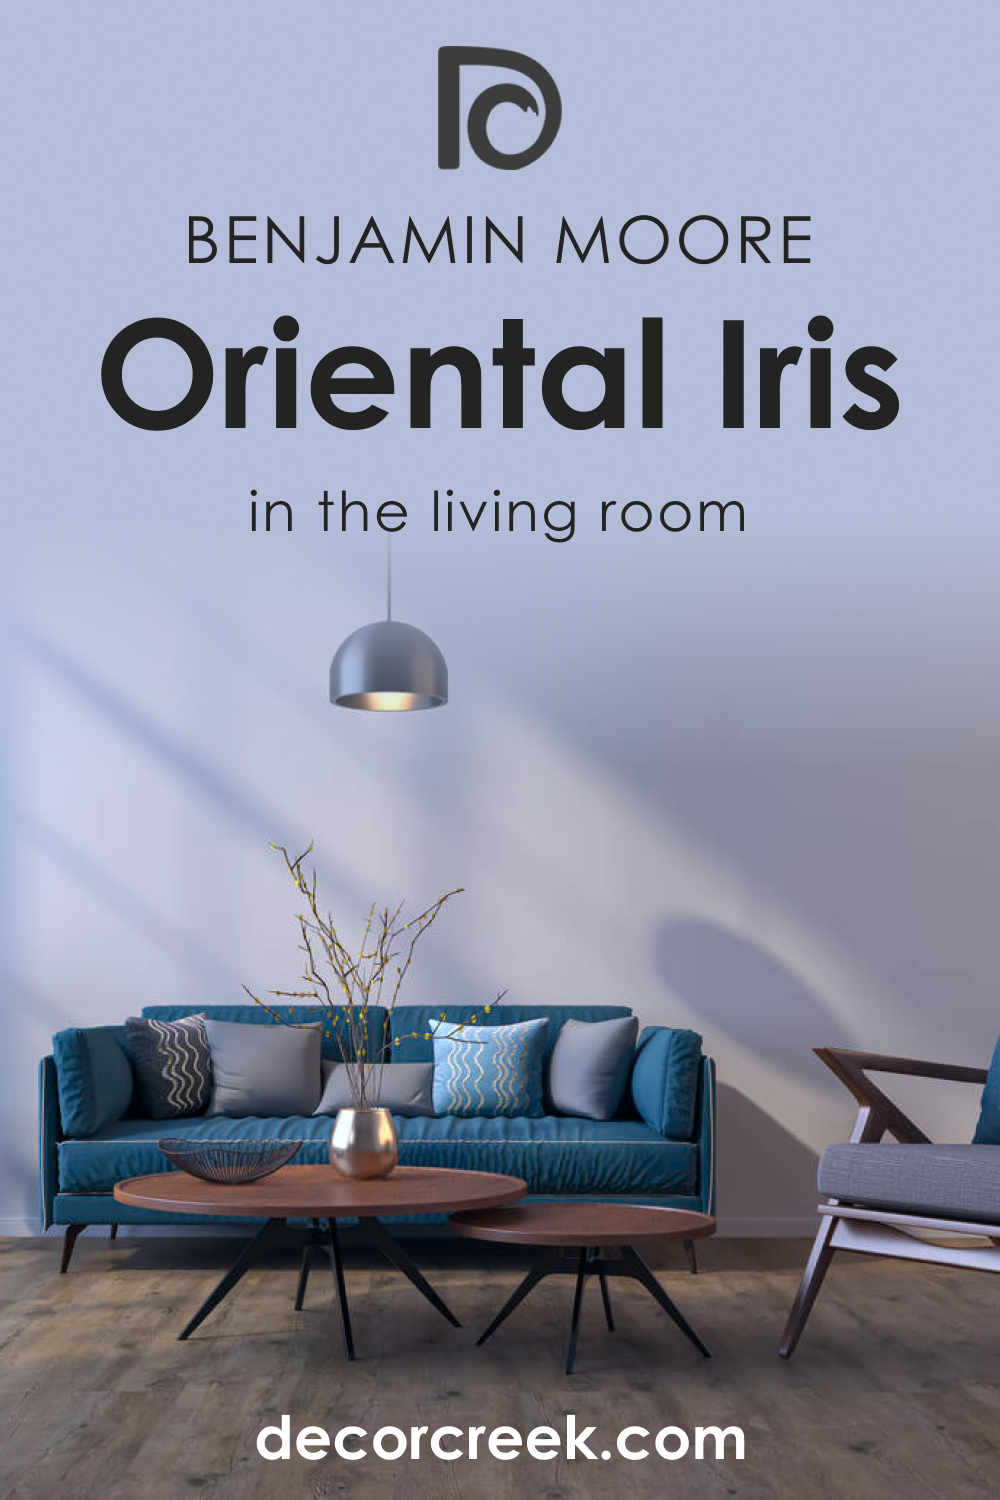 How to Use Oriental Iris 1418 in the Living Room?